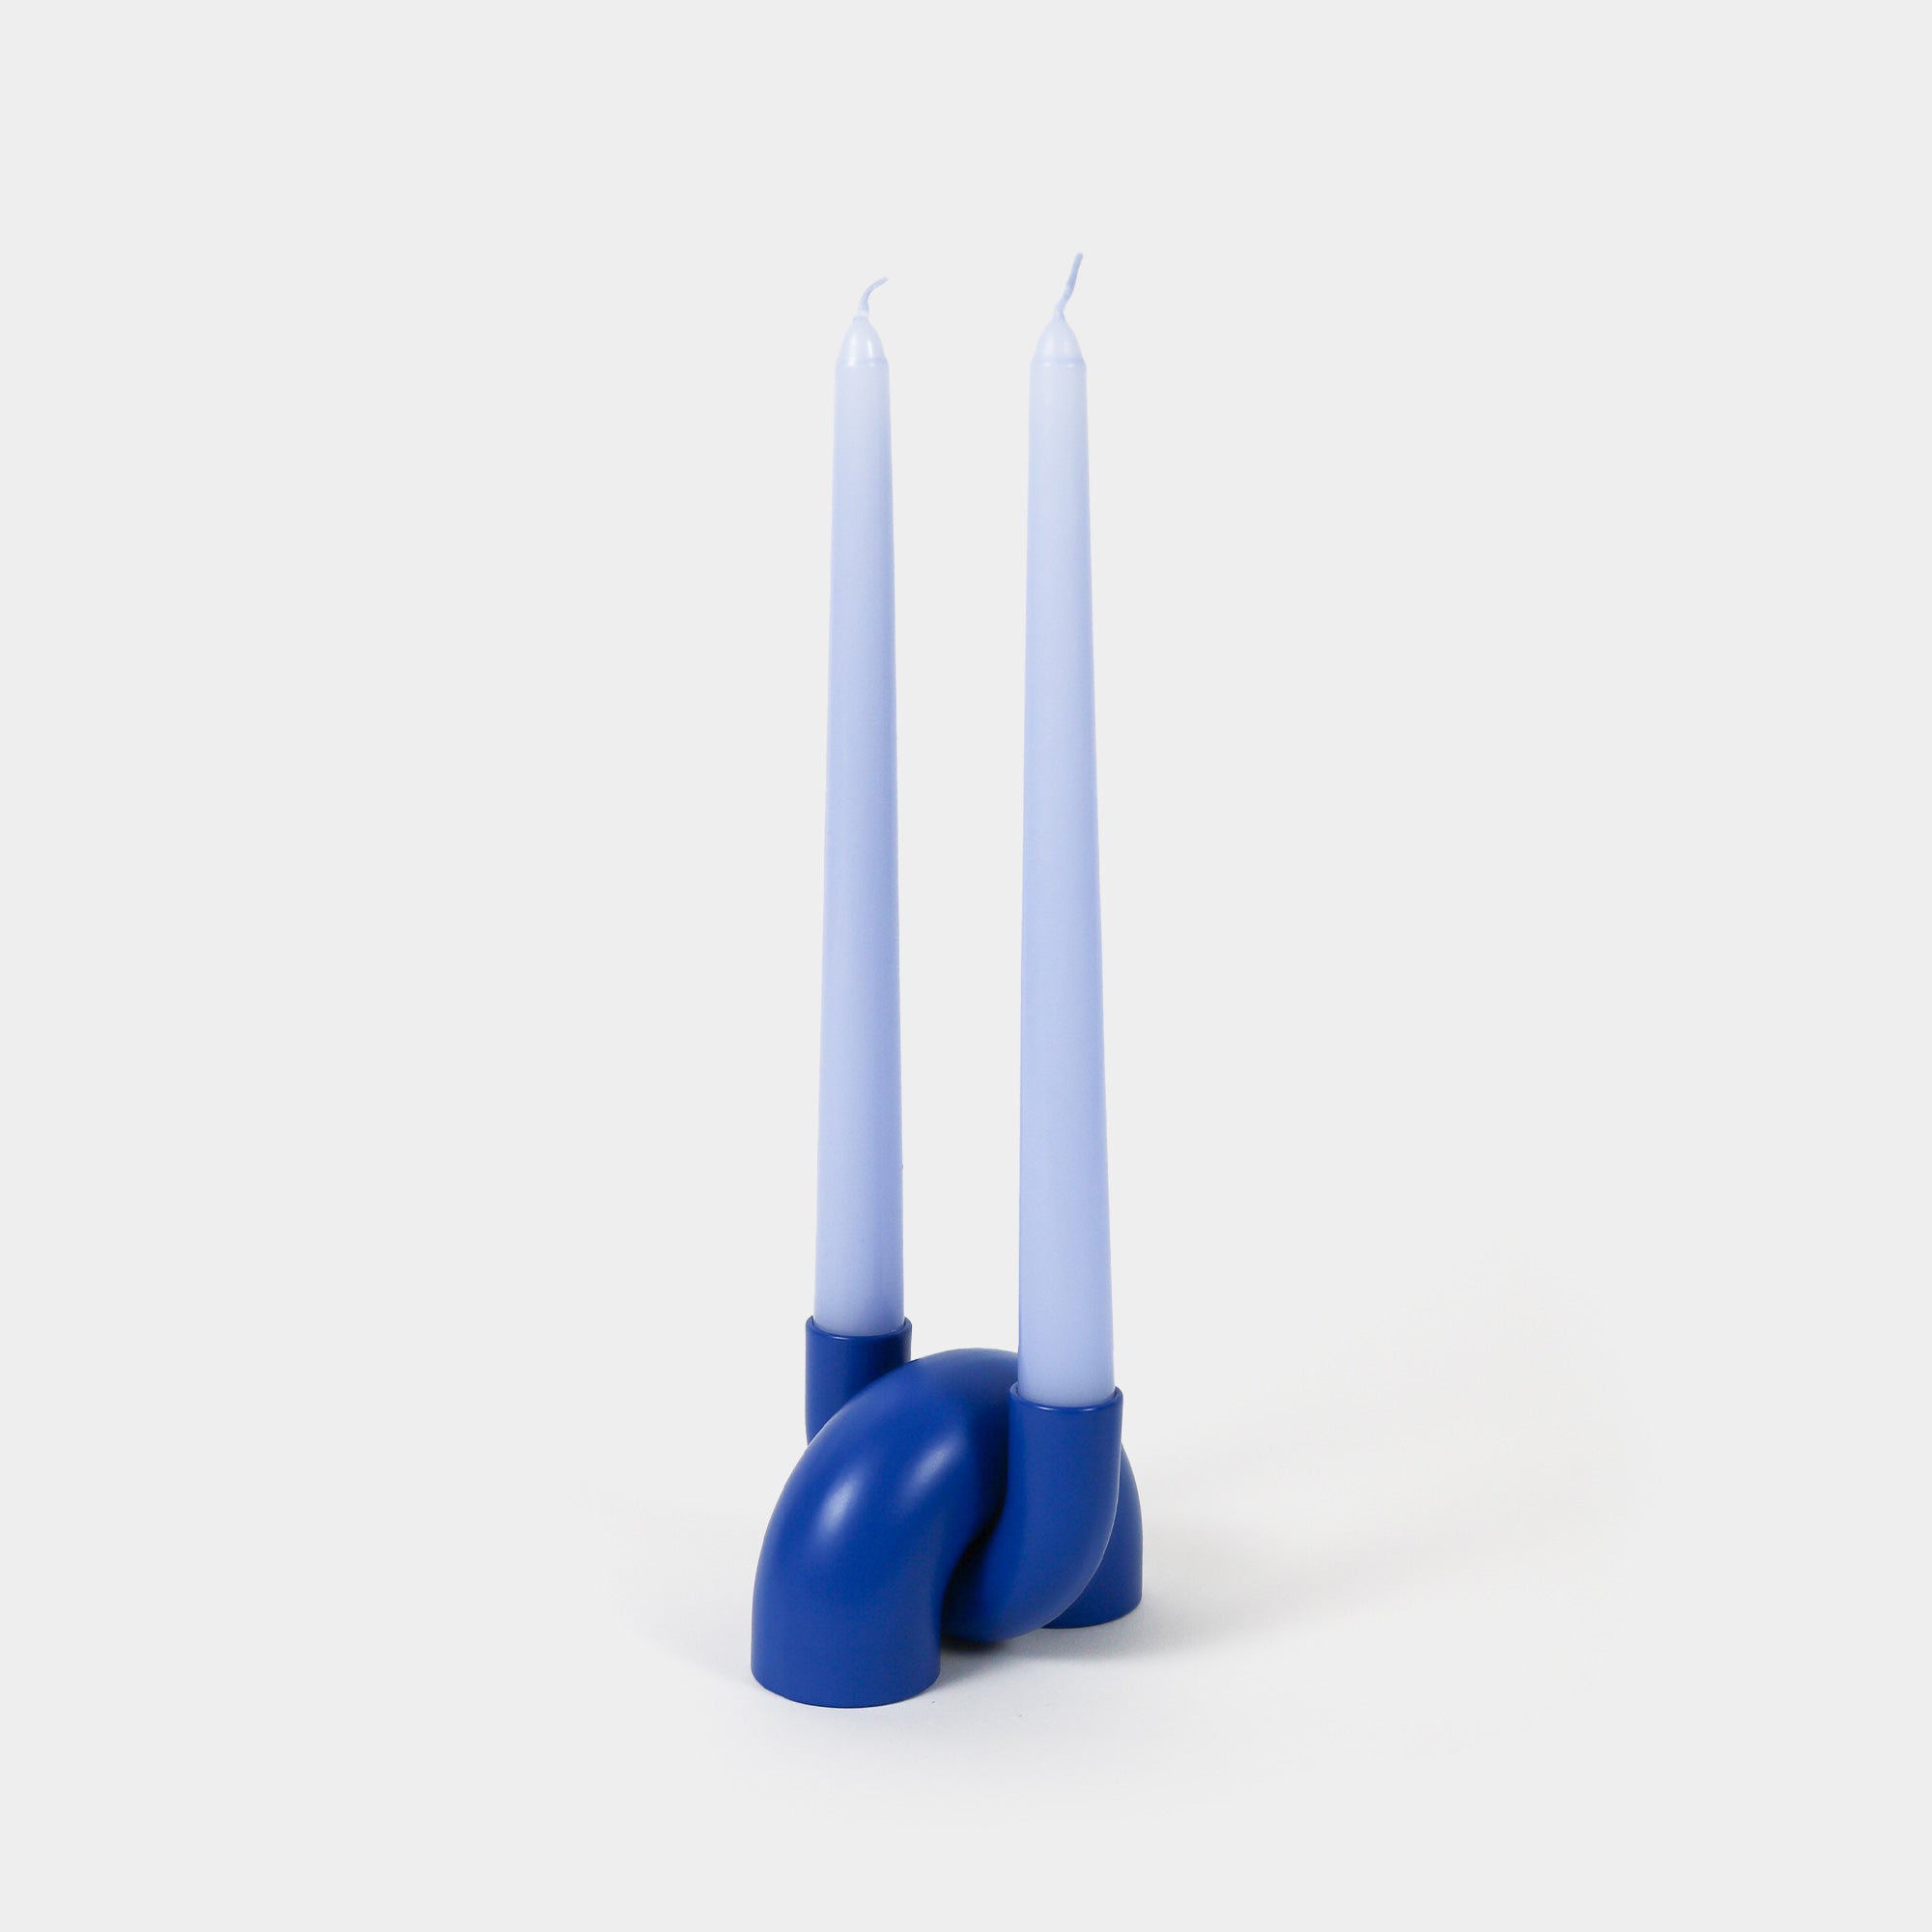 Macaroni 2-in-1 Candleholder - Tapers & Tealights - Royal Blue